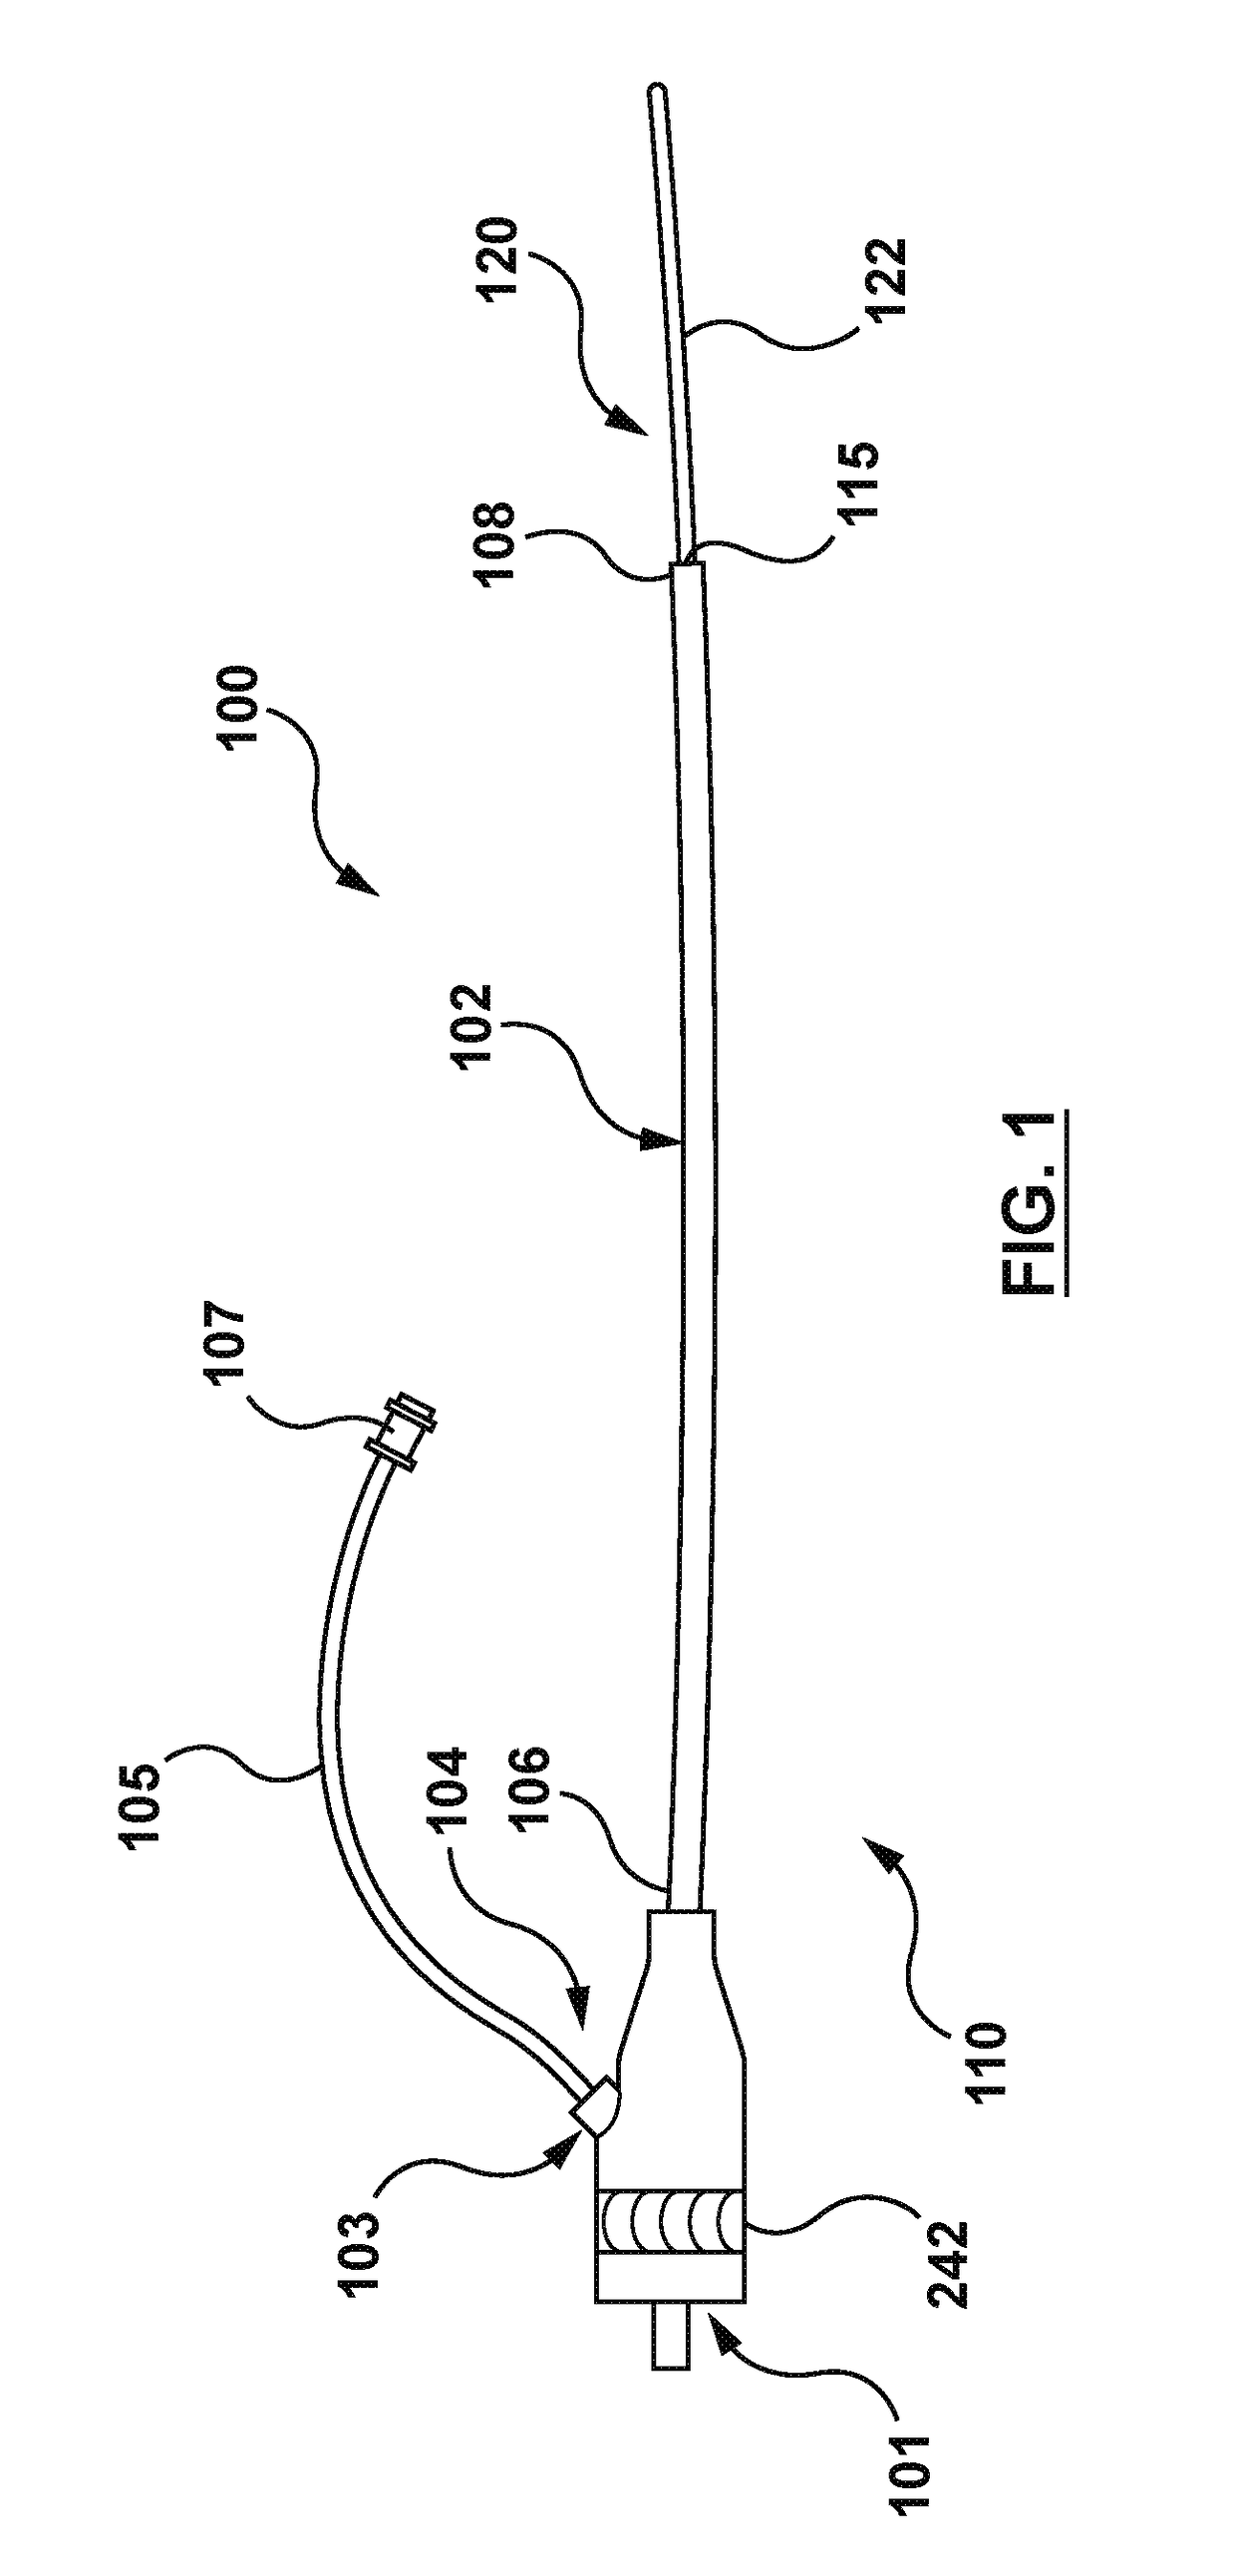 Expandable introducer sheath having a steering mechanism